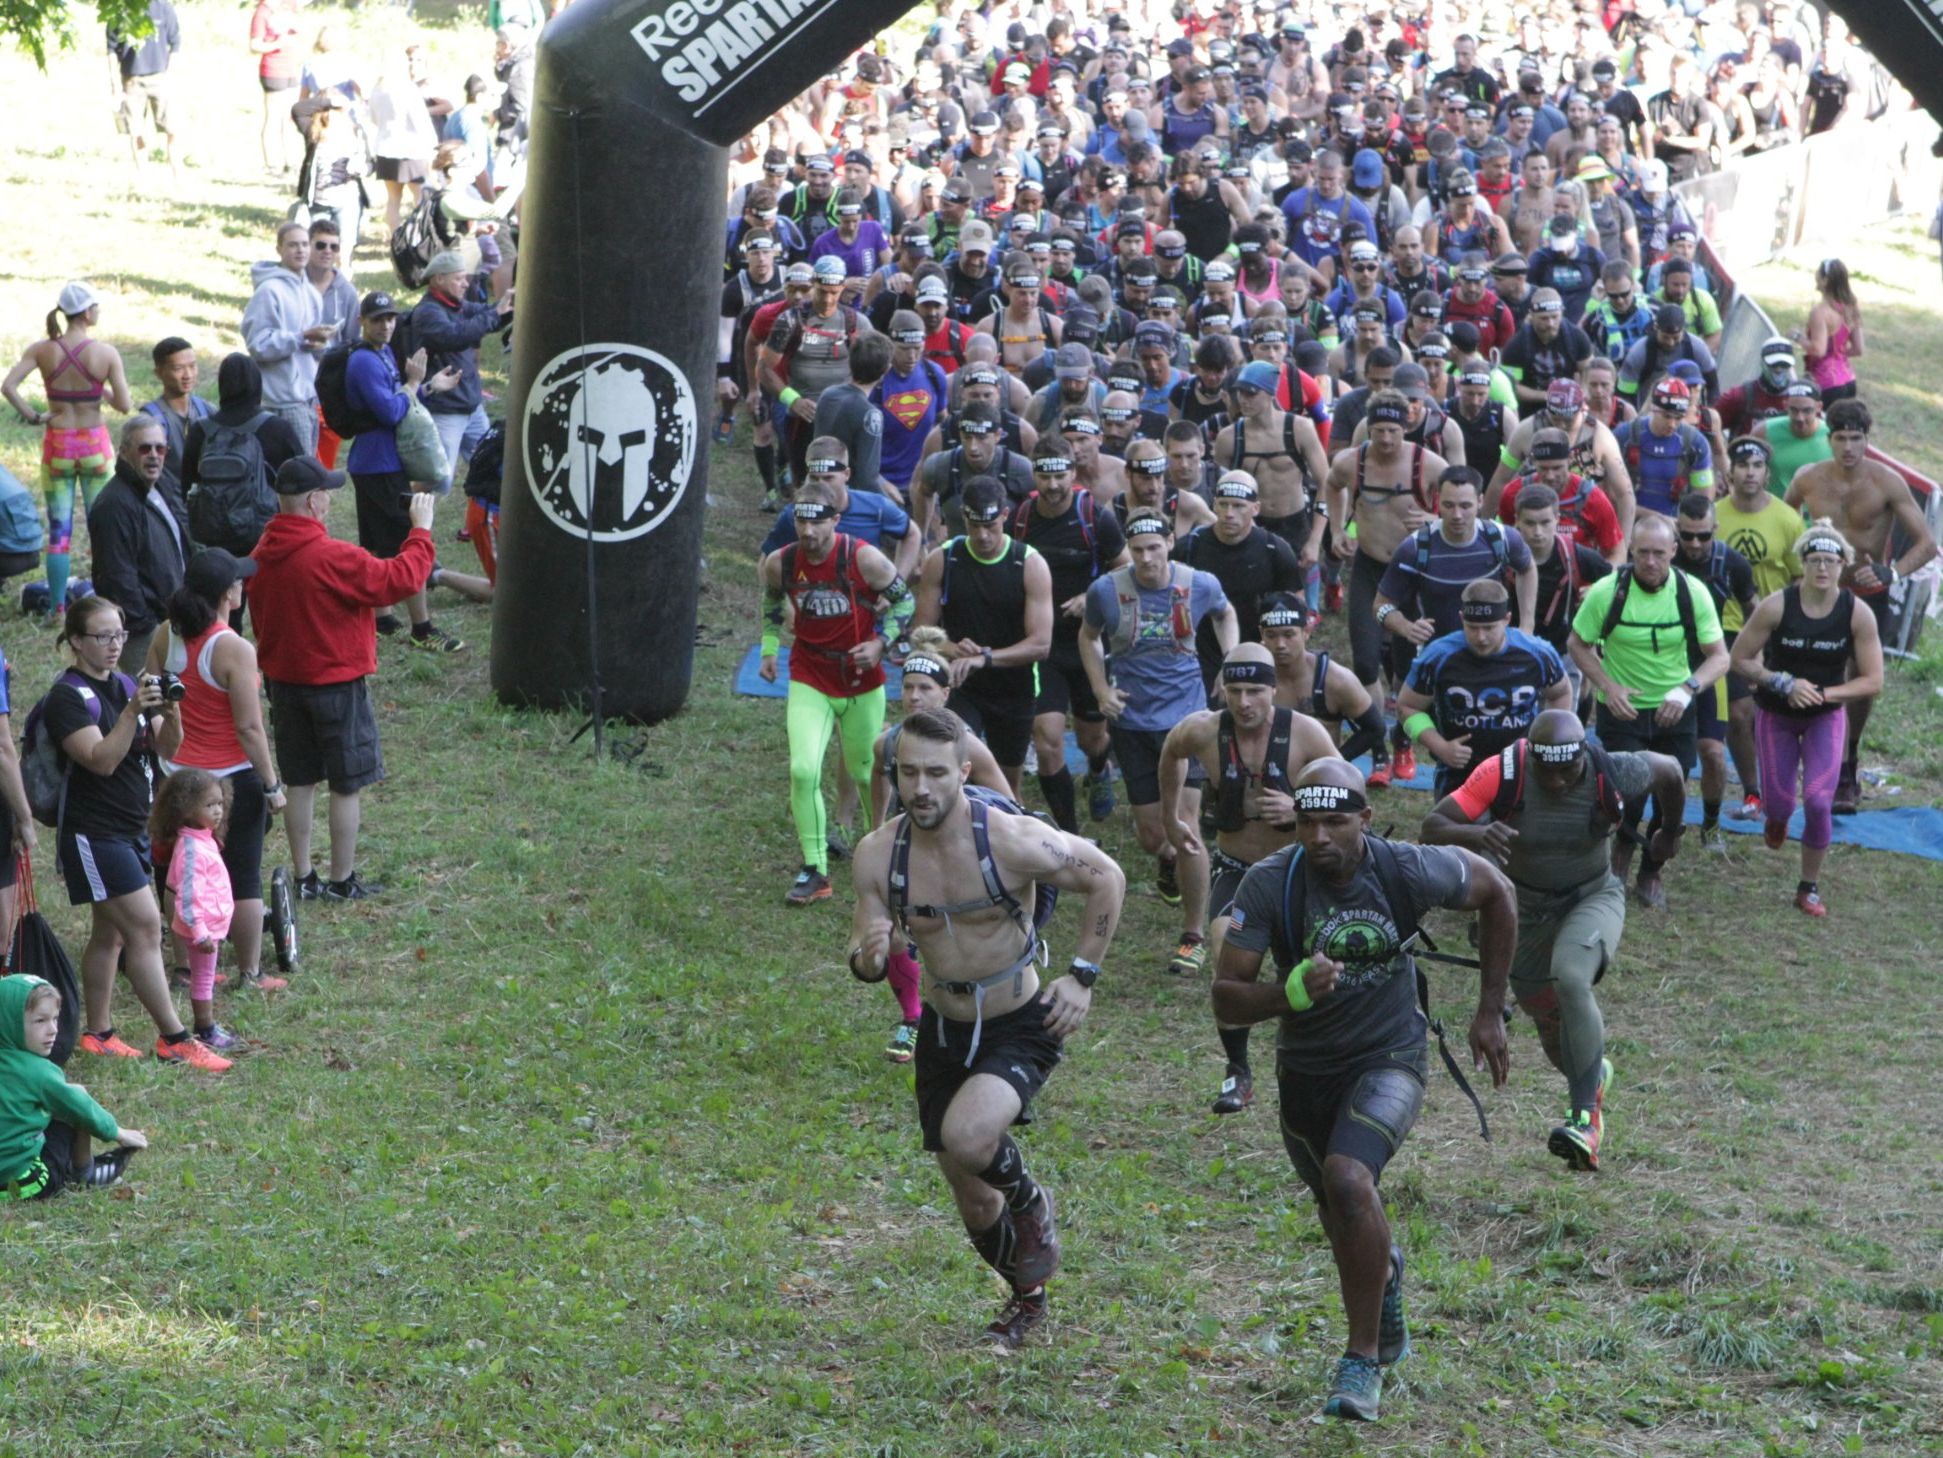 revolution Museum Nominering The Spartan race army is at the gates | CNN